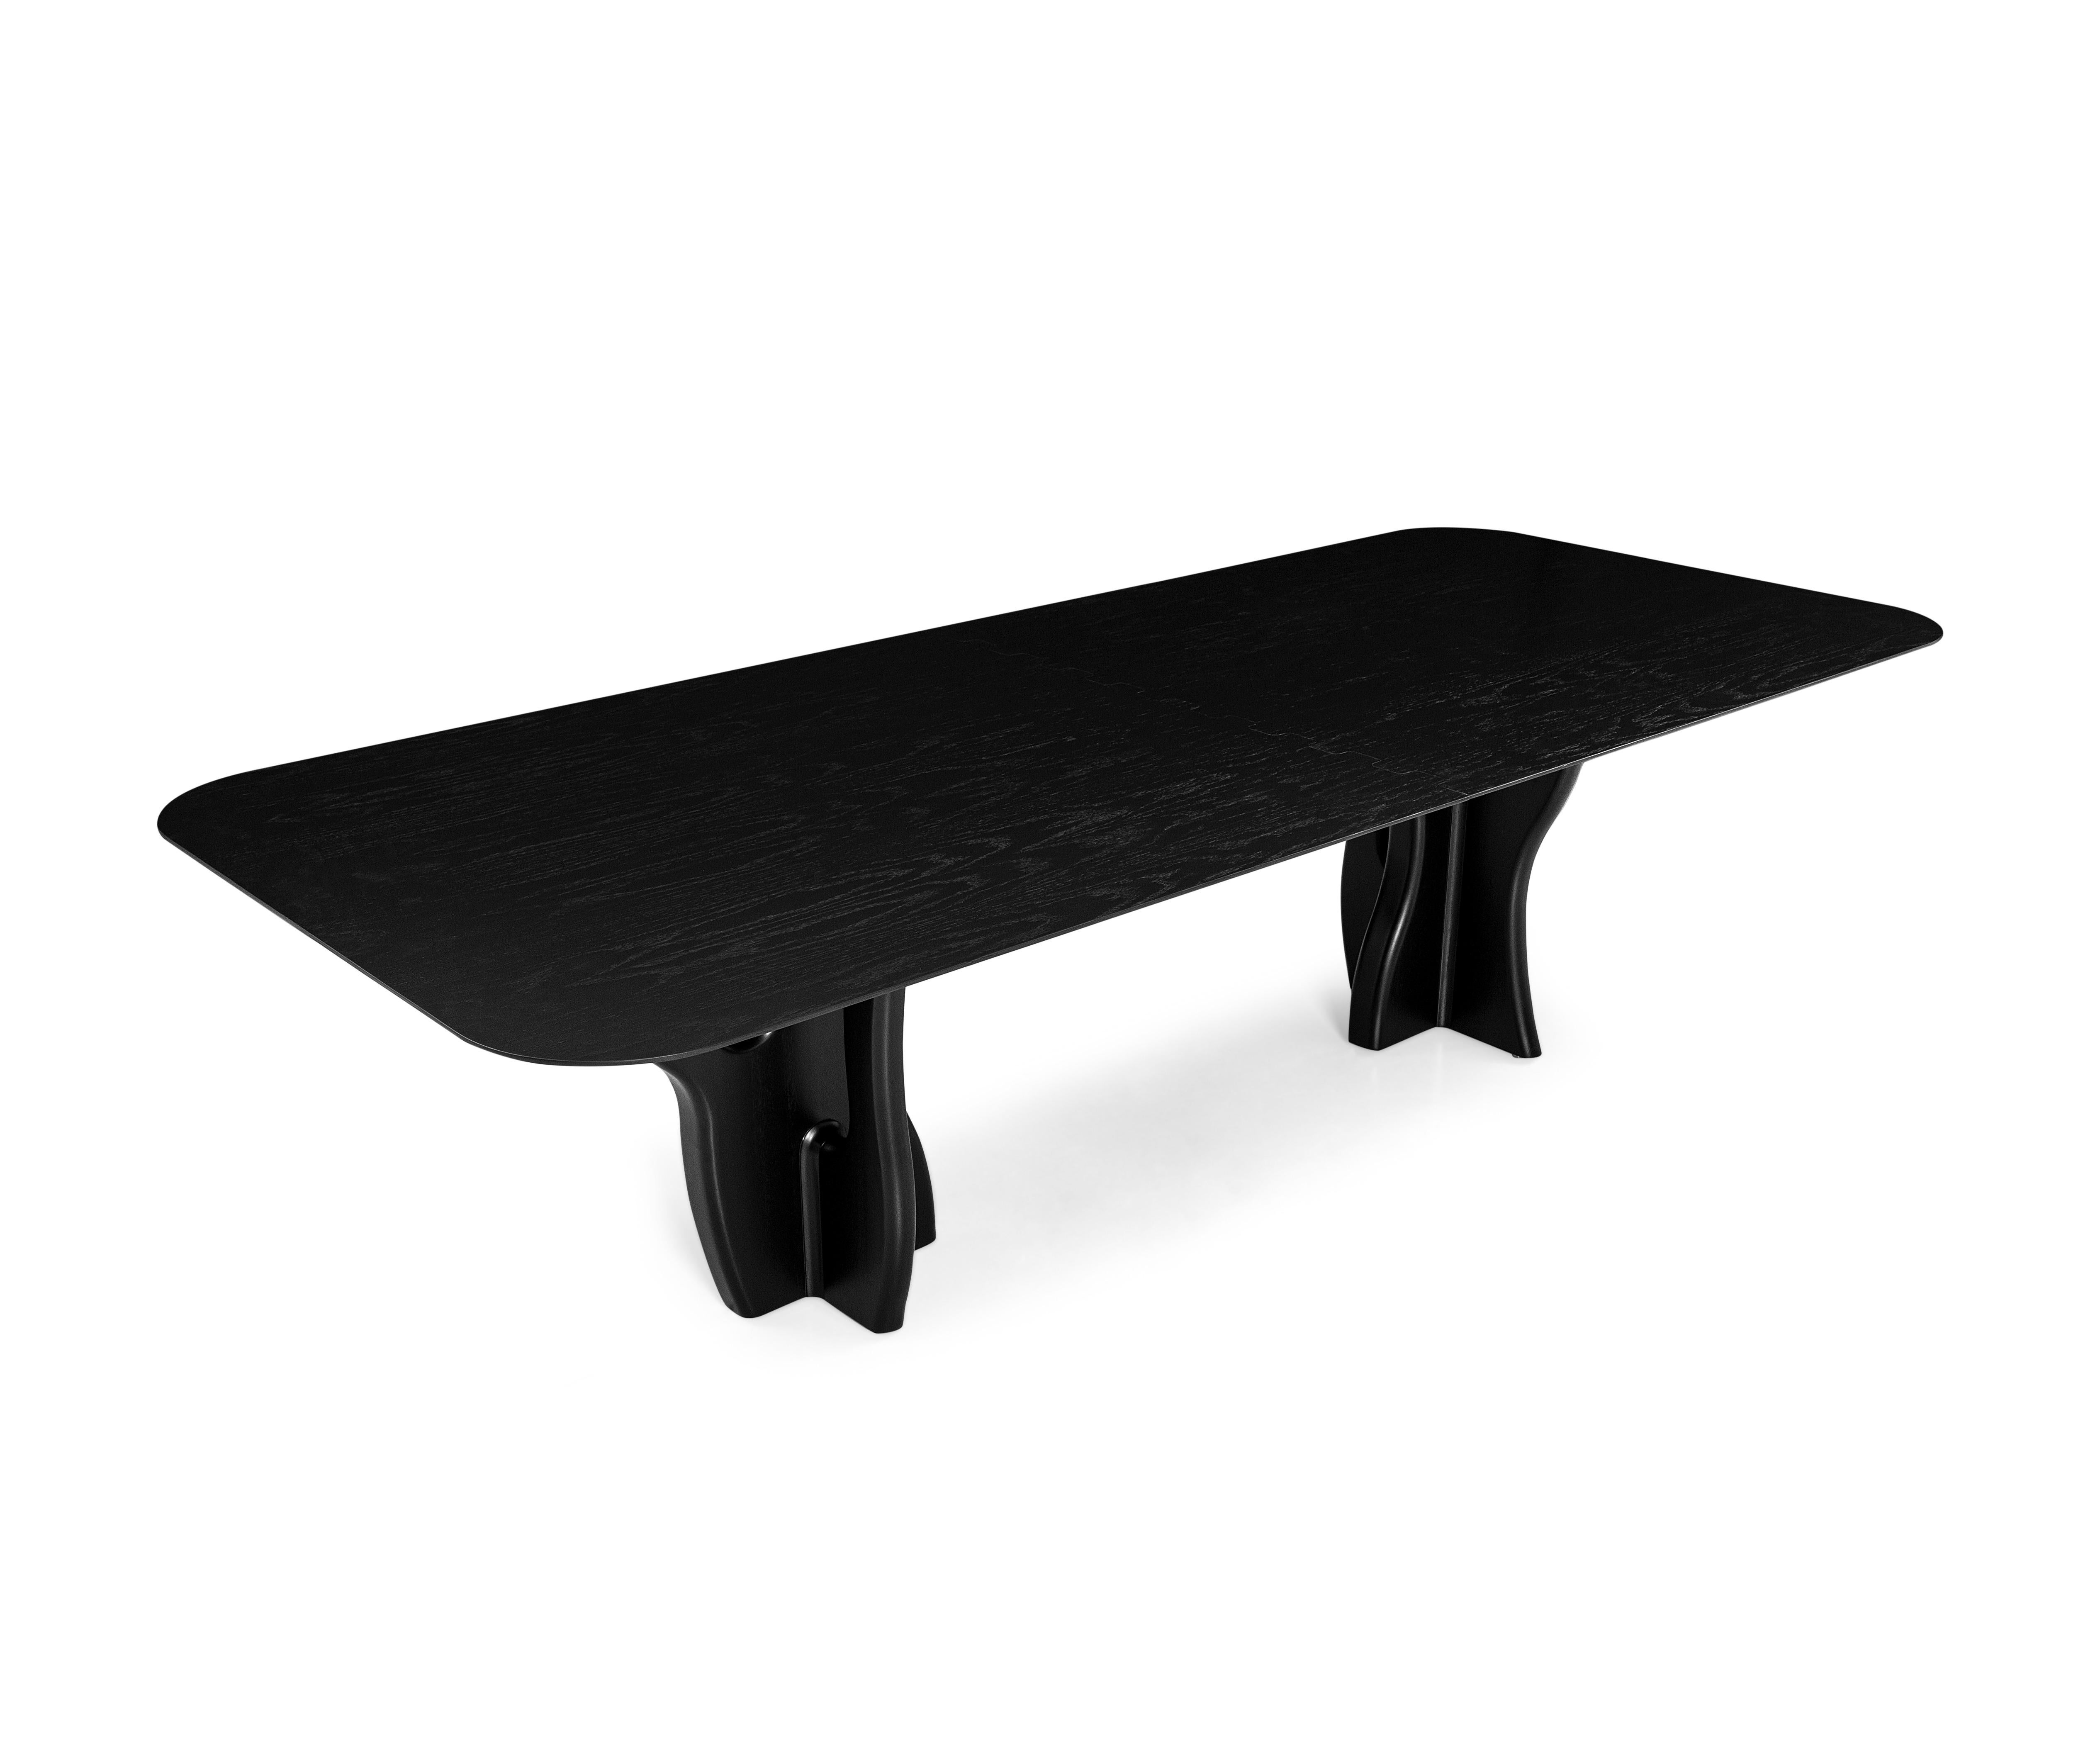 Brazilian Suma Dining Table with Black Oak Top and Organic Solid Wood Legs 110'' For Sale